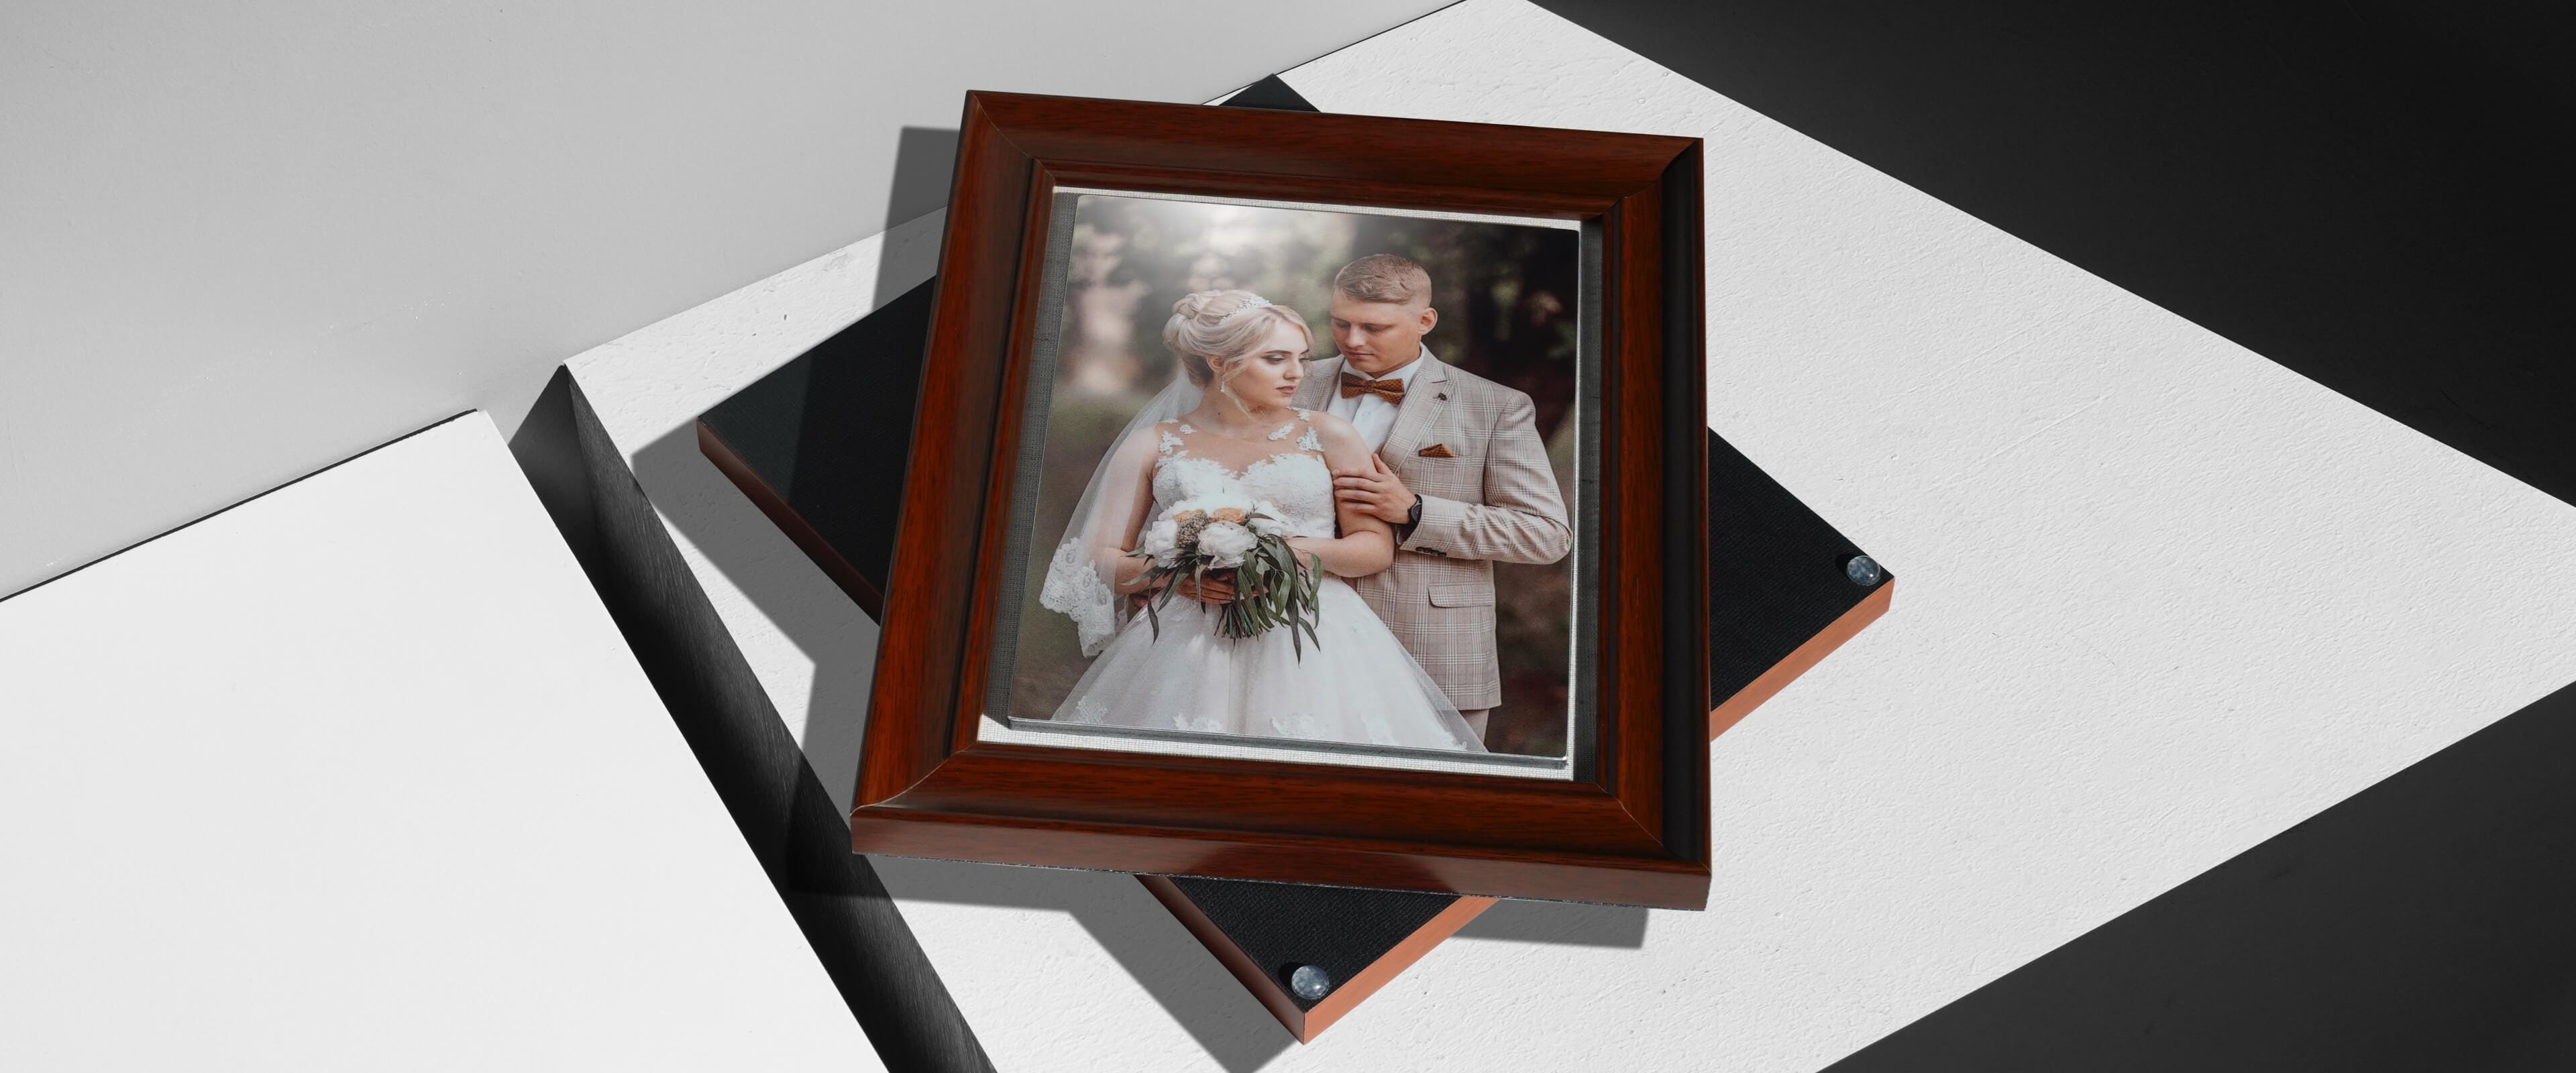 framed metal print stacked on top of another framed metal print showing wedding couple